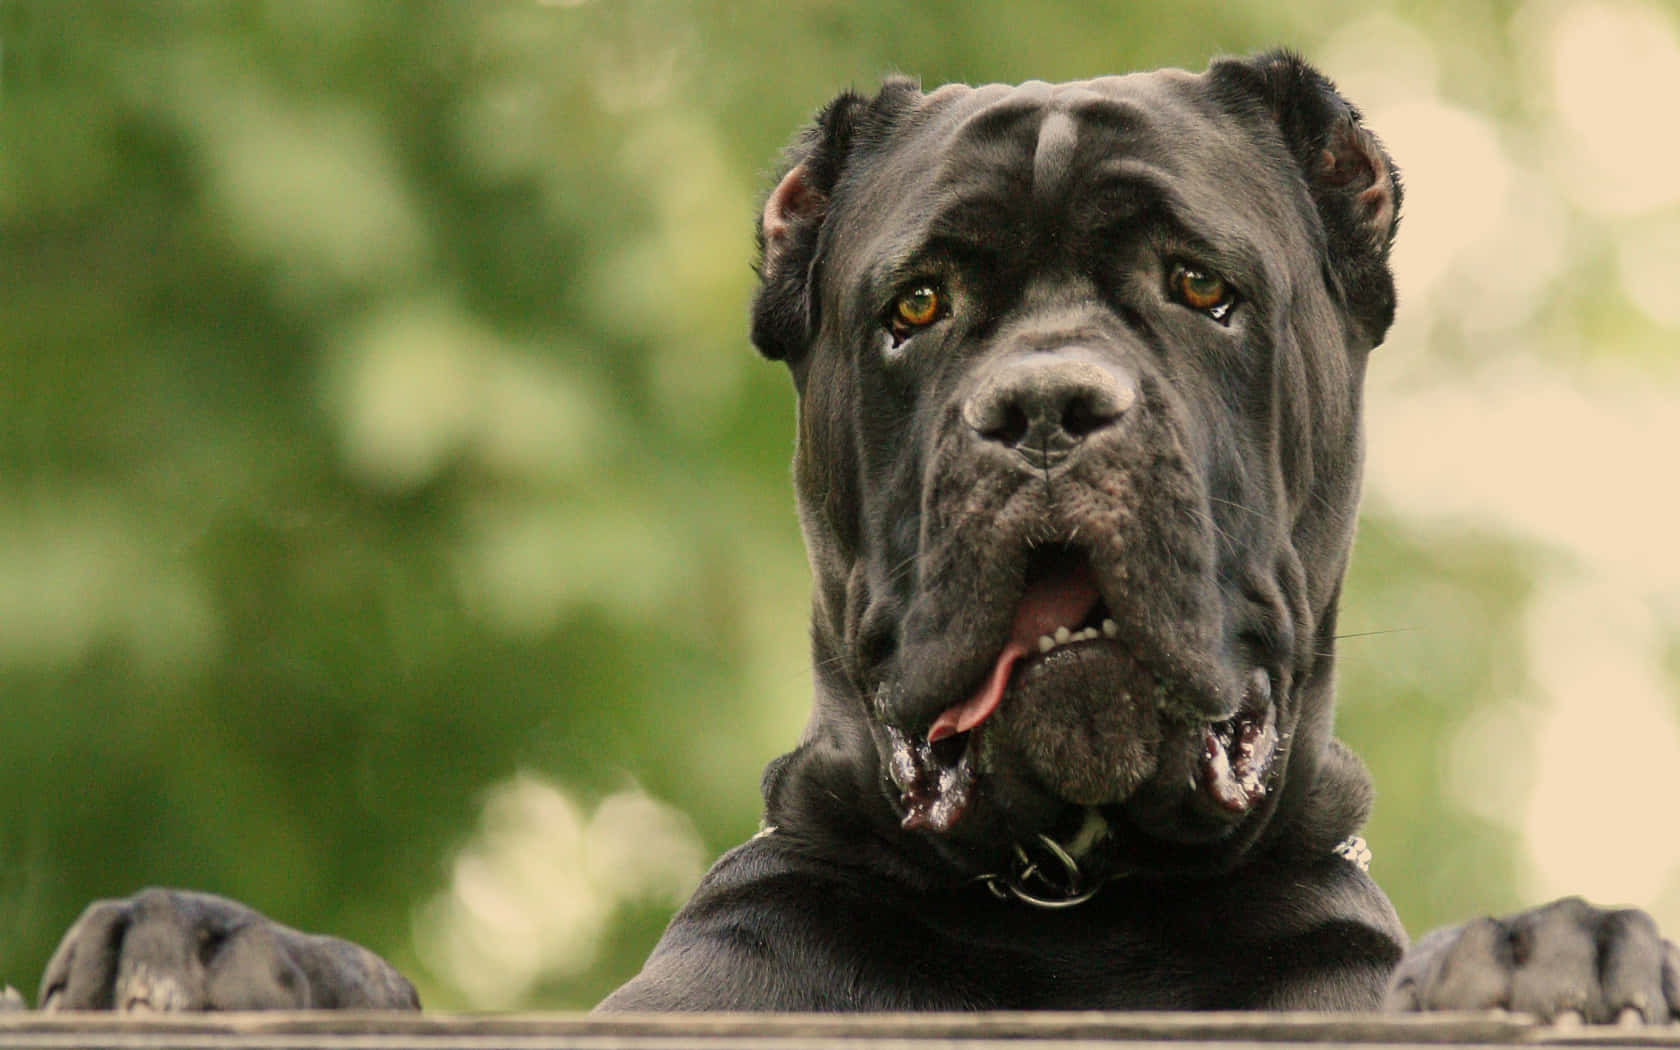 This loyal and protective Cane Corso is ready to be your best friend!